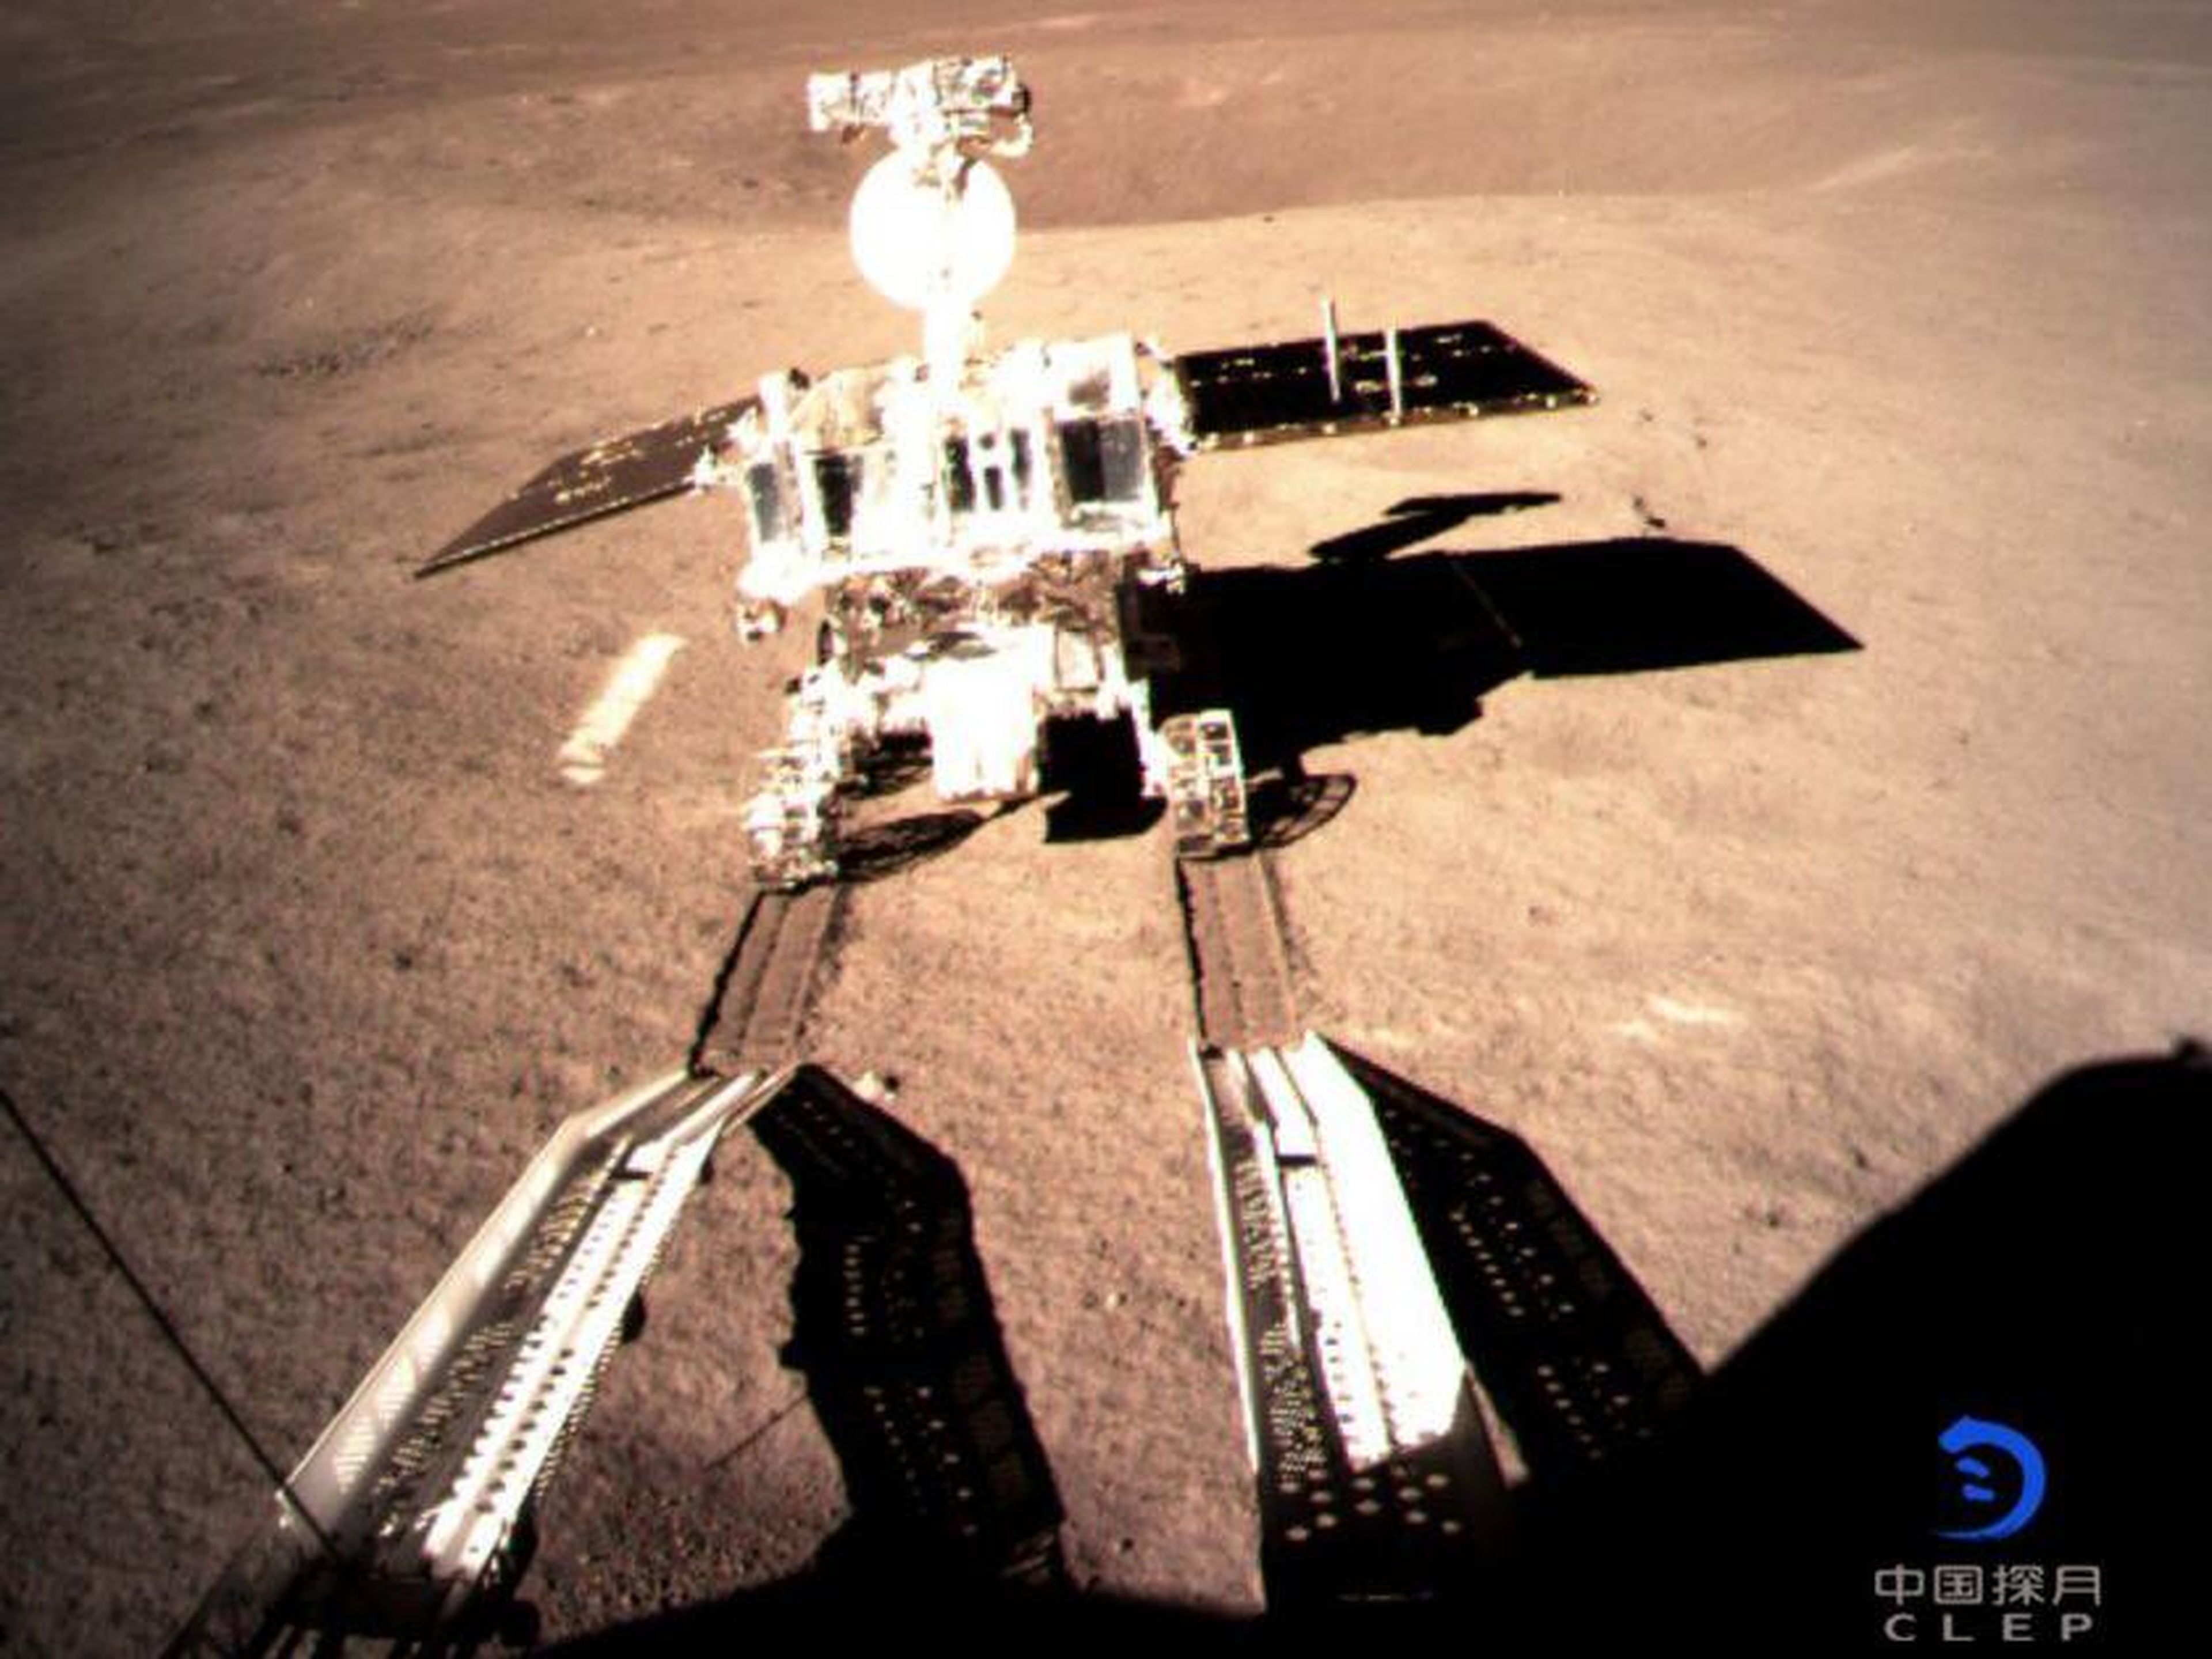 The Yutu-2 rover rolled onto the lunar surface on January 3, 2019 as part of the Chang'e 4 mission to the far side of the moon.